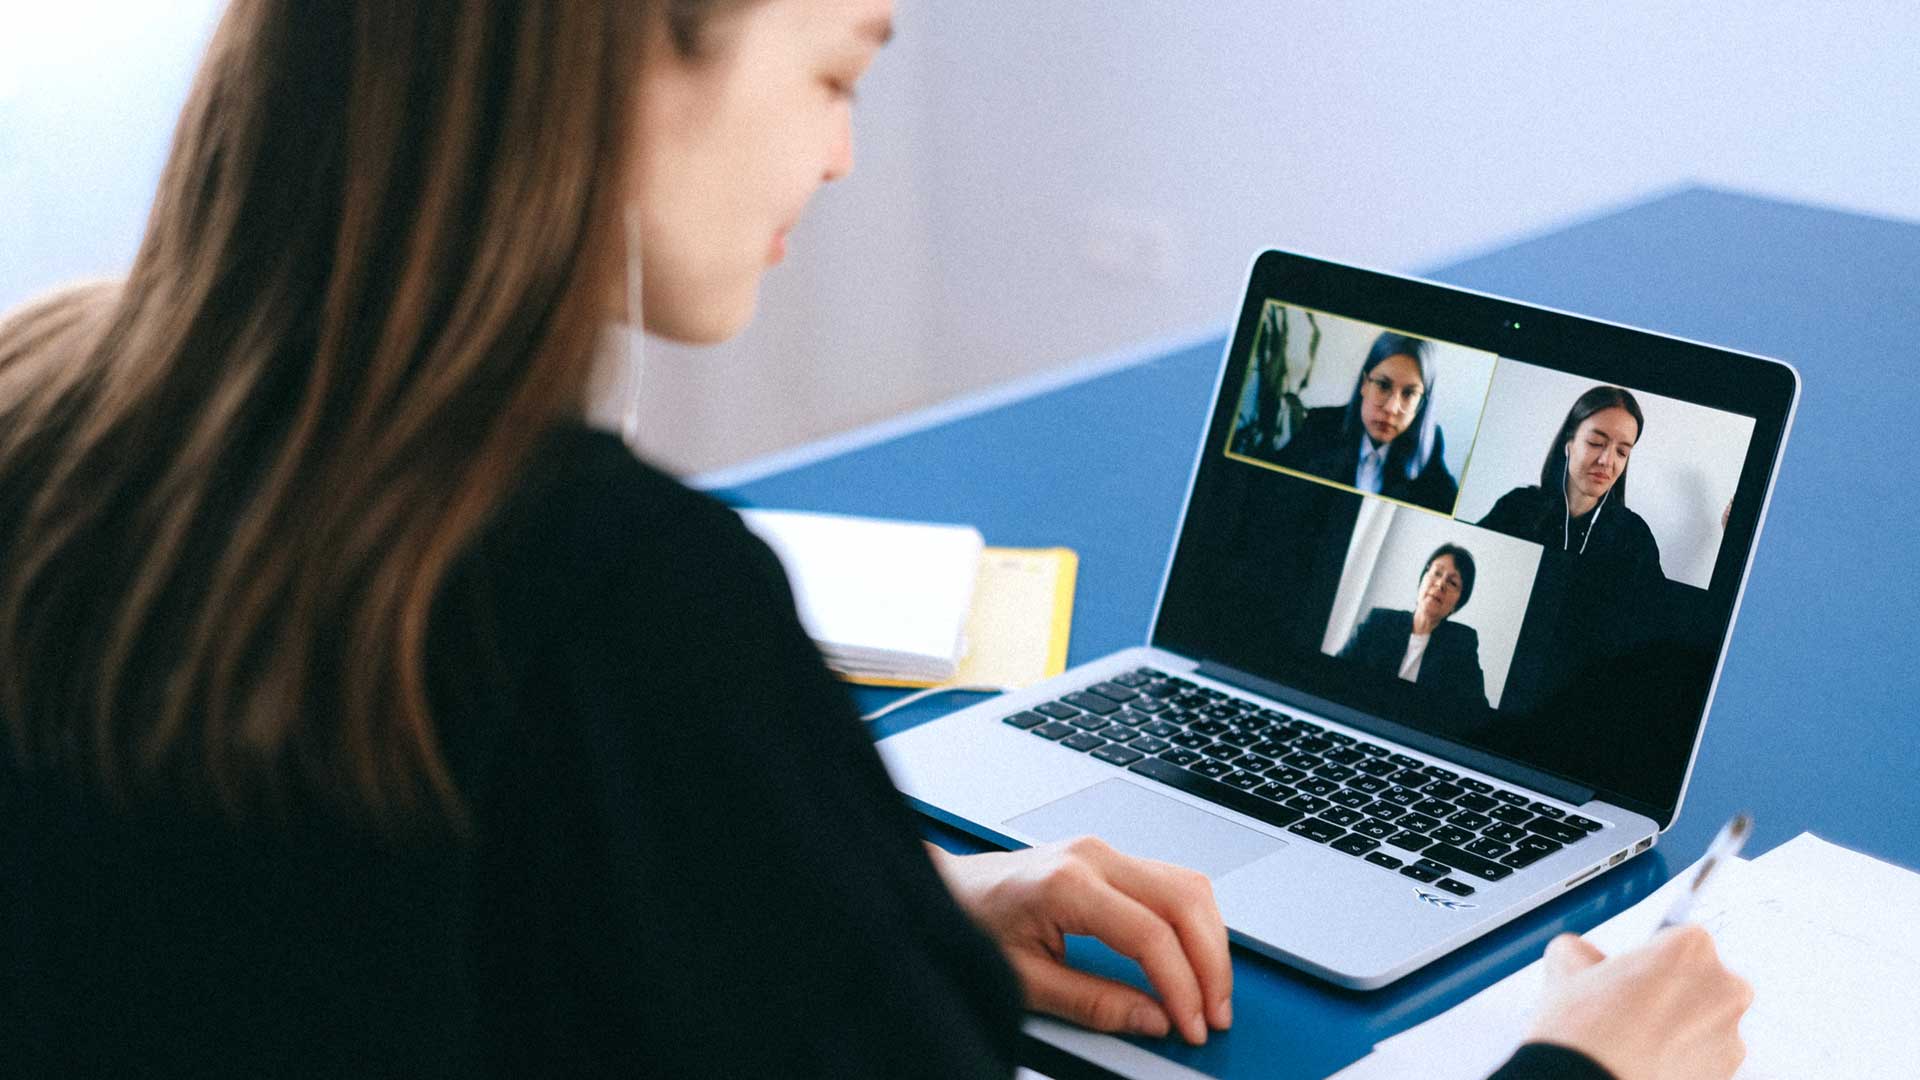 Replace Business Travel With Video Meetings In The Post COVID-19 World